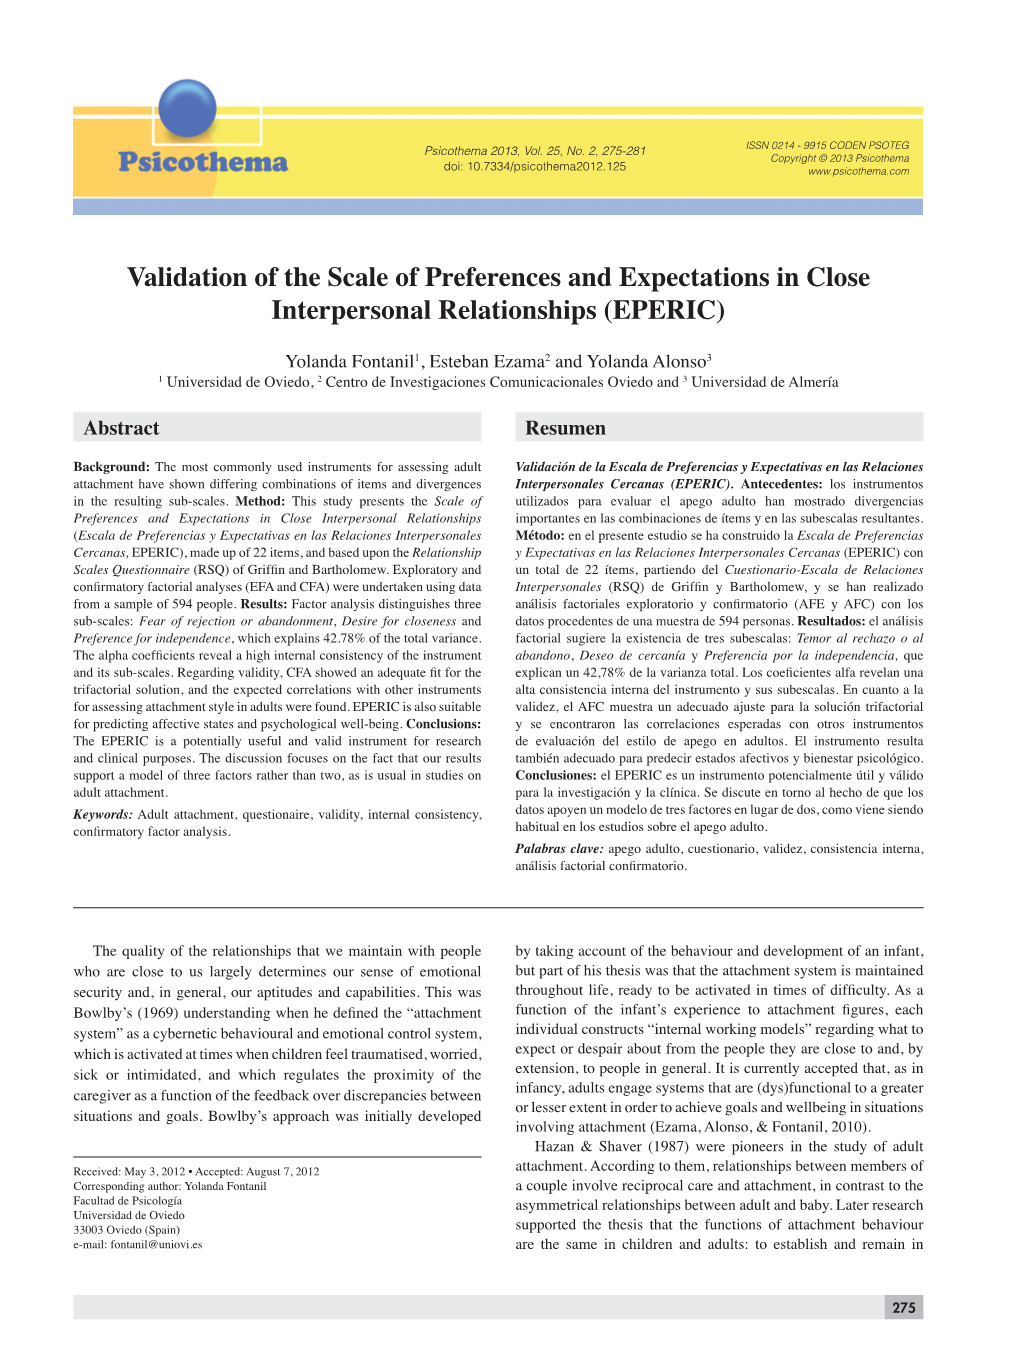 Validation of the Scale of Preferences and Expectations in Close Interpersonal Relationships (EPERIC)